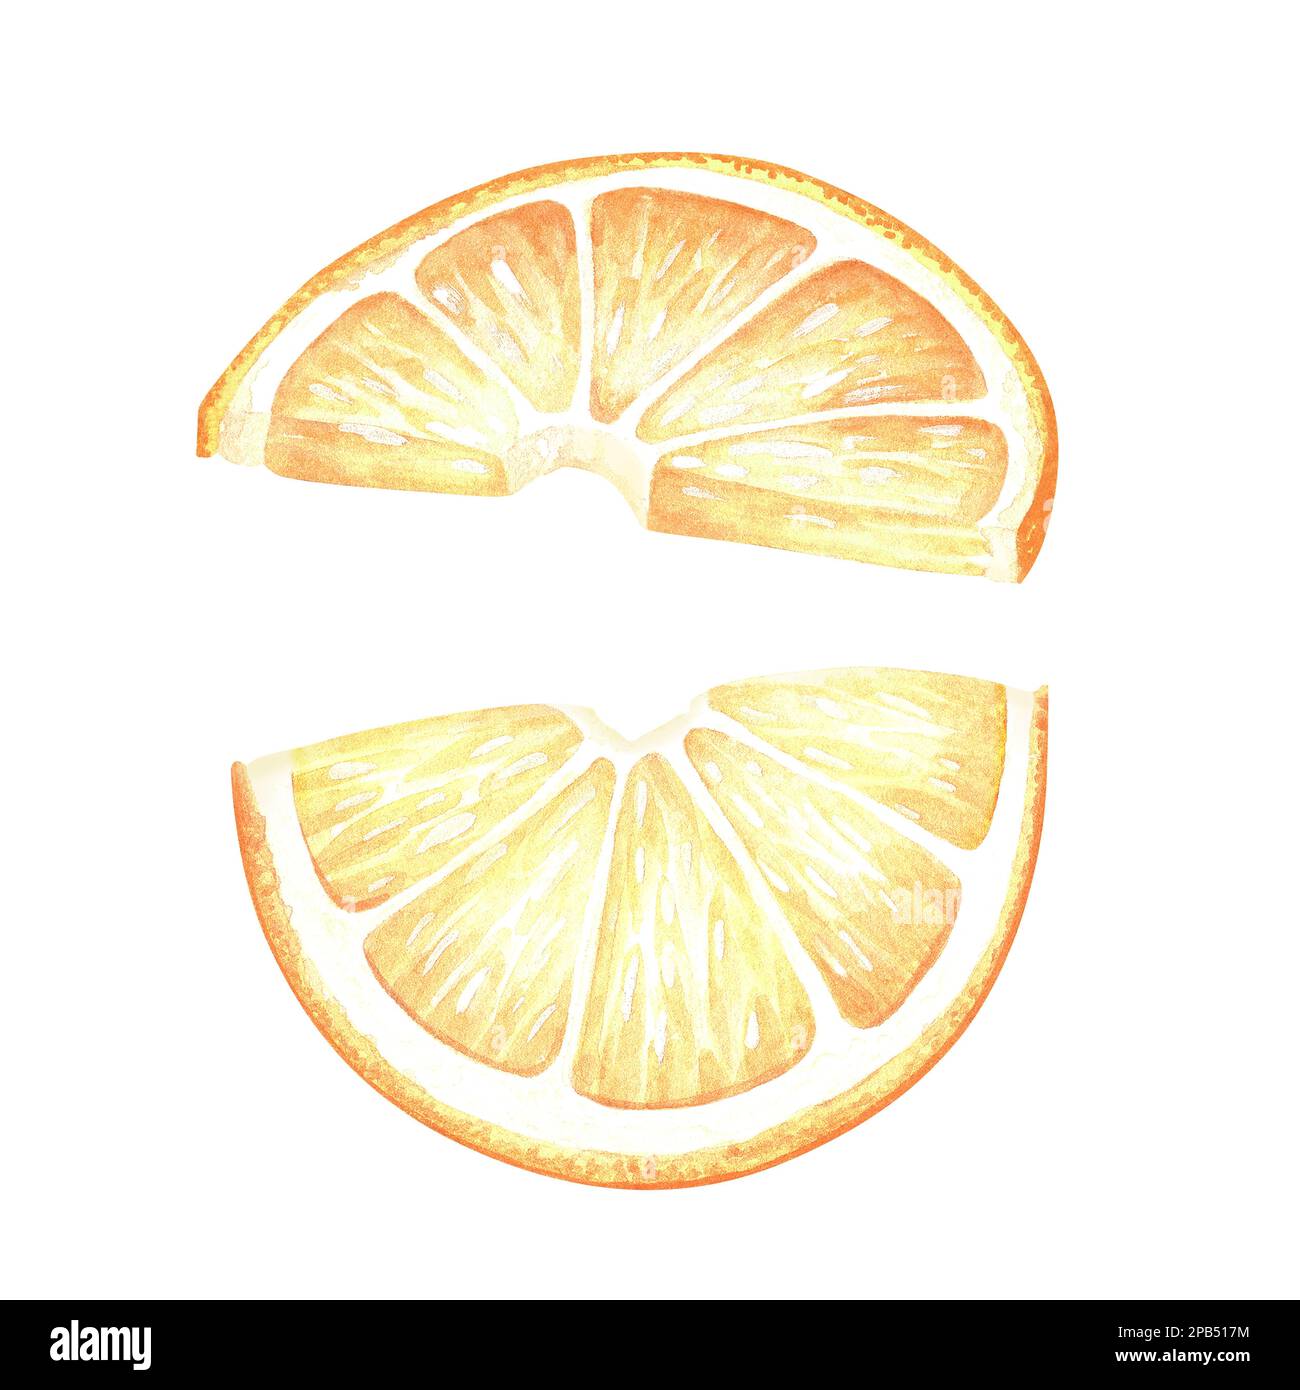 Two semicircular lemon slices. Watercolor illustration. Isolated on a white background. For your design stickers, nature prints, product packaging wit Stock Photo